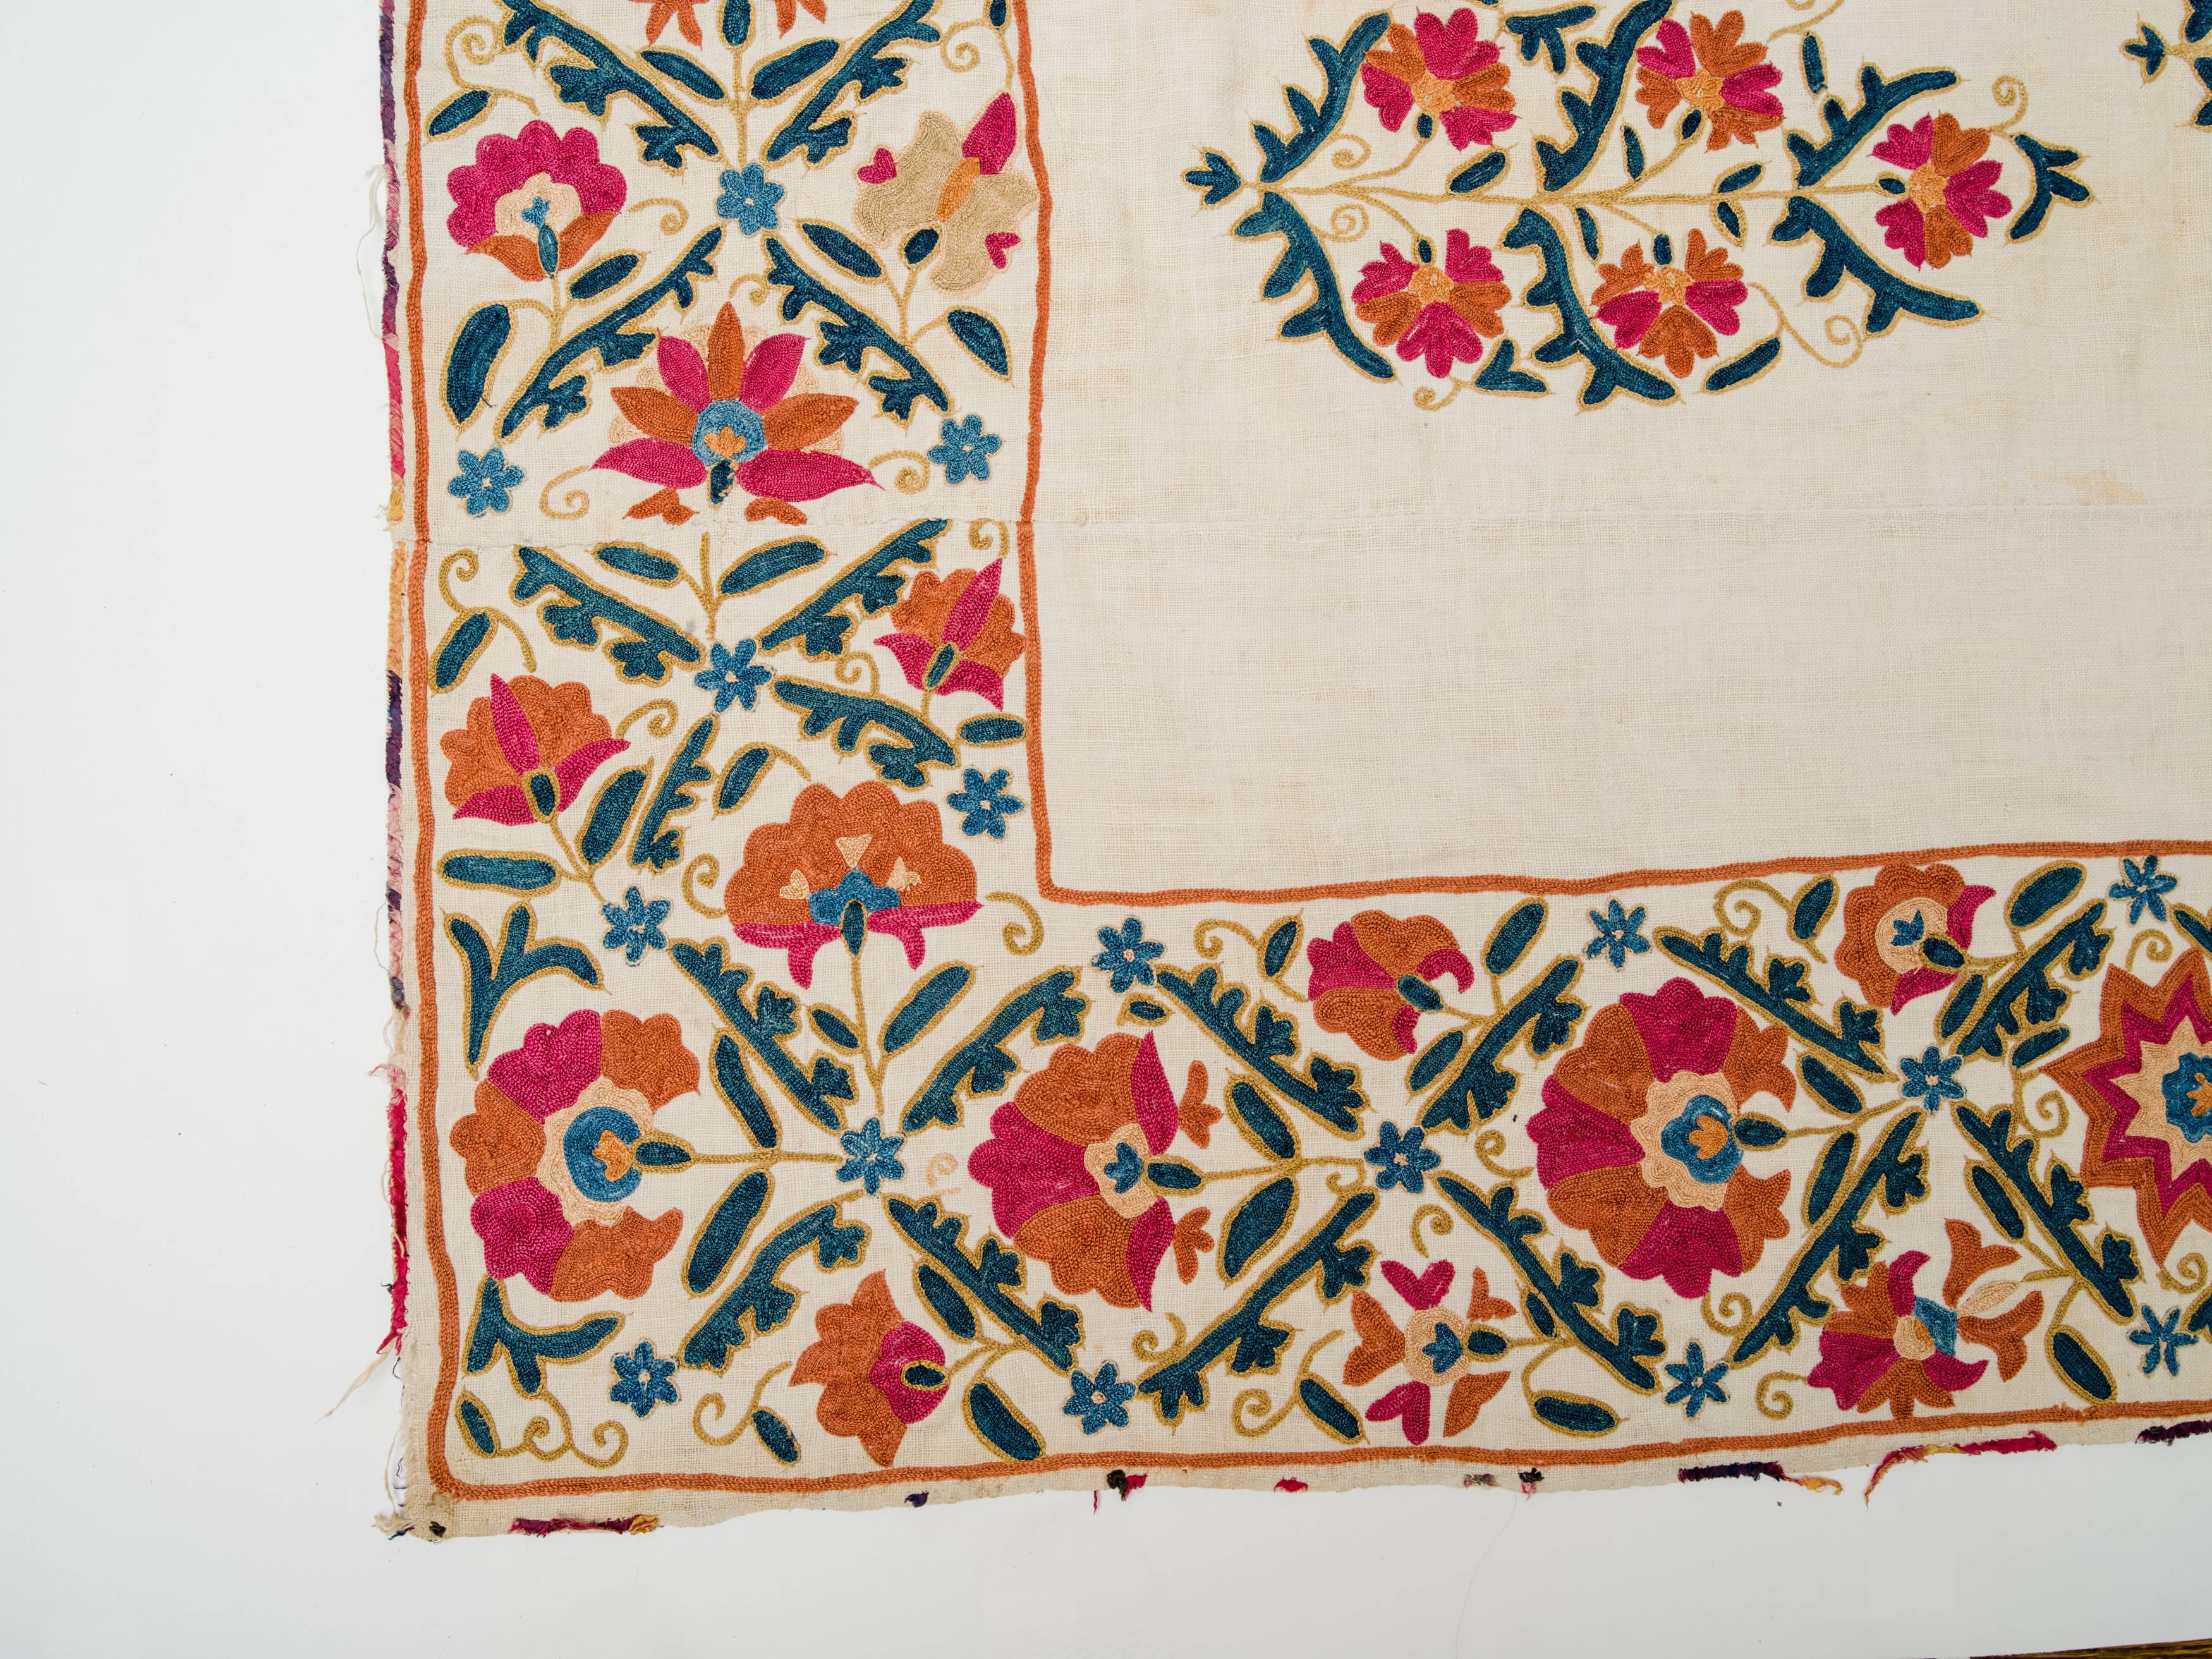 19th Century Uzbek Silk Embroidered Suzani Tapestry In Fair Condition For Sale In New York, NY